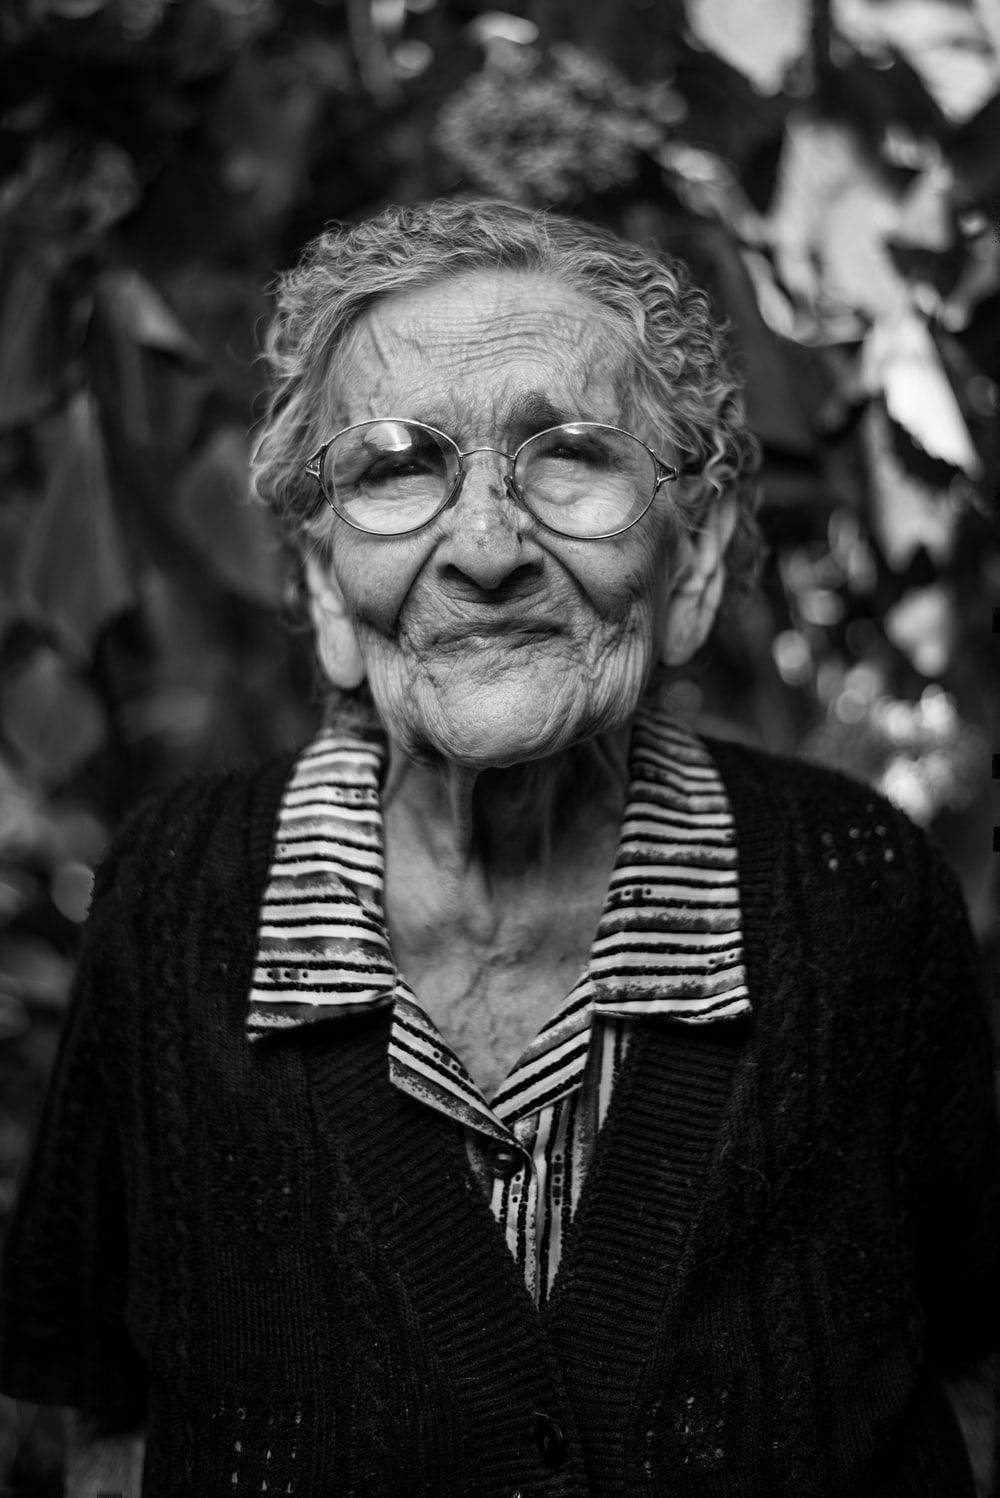 Svartoch Vit Vacker Äldre Kvinna. (this Phrase Could Be Used As A Search Term Or Title For A Black And White Wallpaper Featuring A Beautiful Older Woman.) Wallpaper